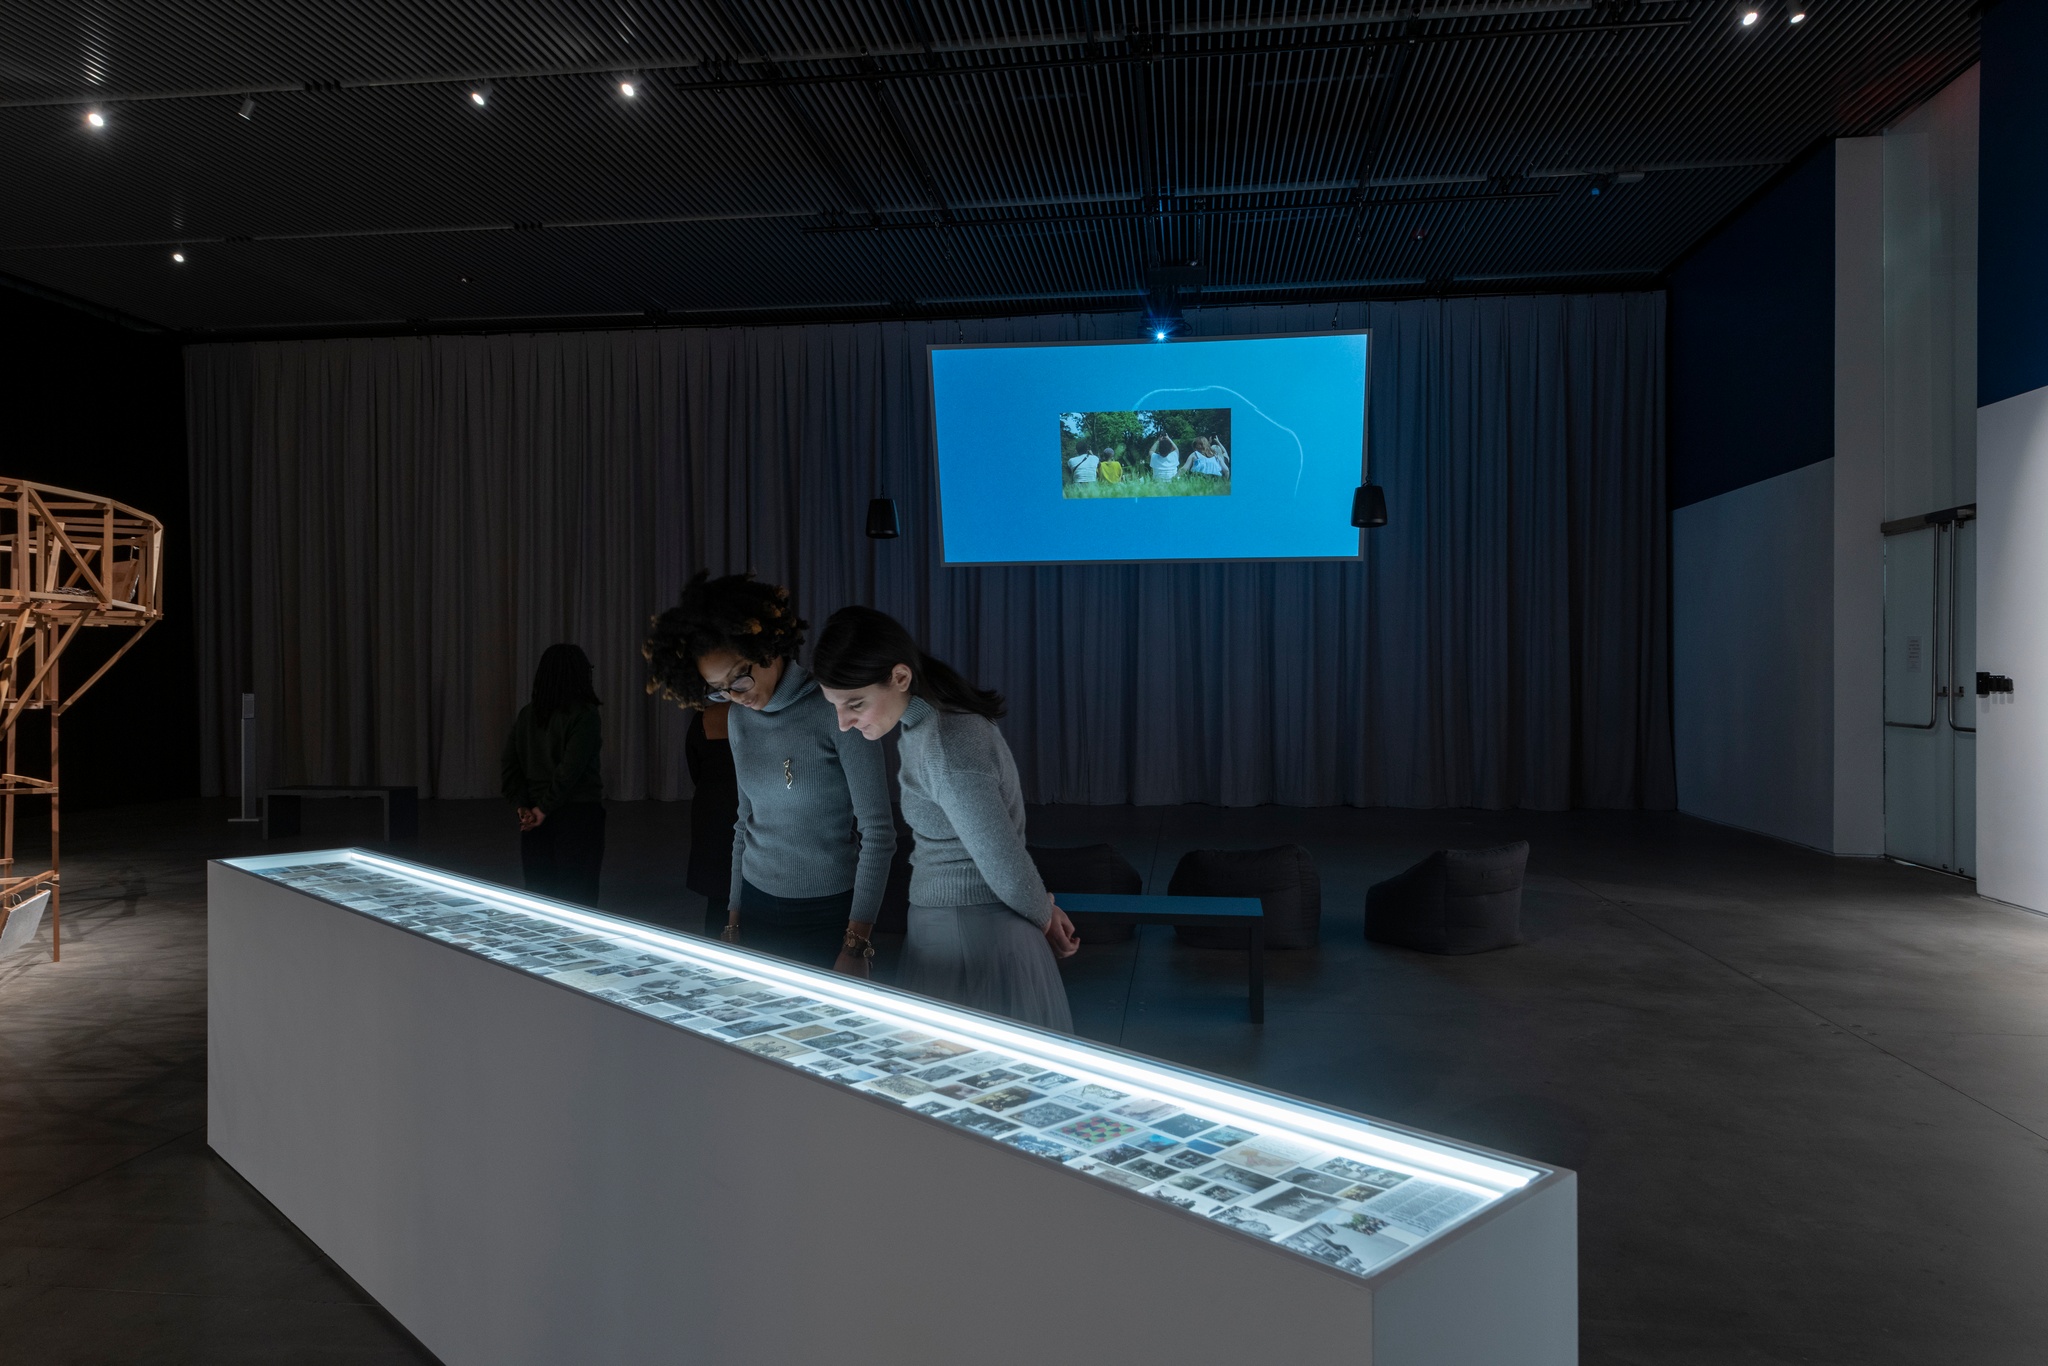 Two gallery visitors peer into a long, lit vitrine. They are examining images as the lights from the vitrine illuminate their faces. Behind them, the gallery is in shadow and a film screen hangs from the ceiling. The screen shows an image of a blue sky. 